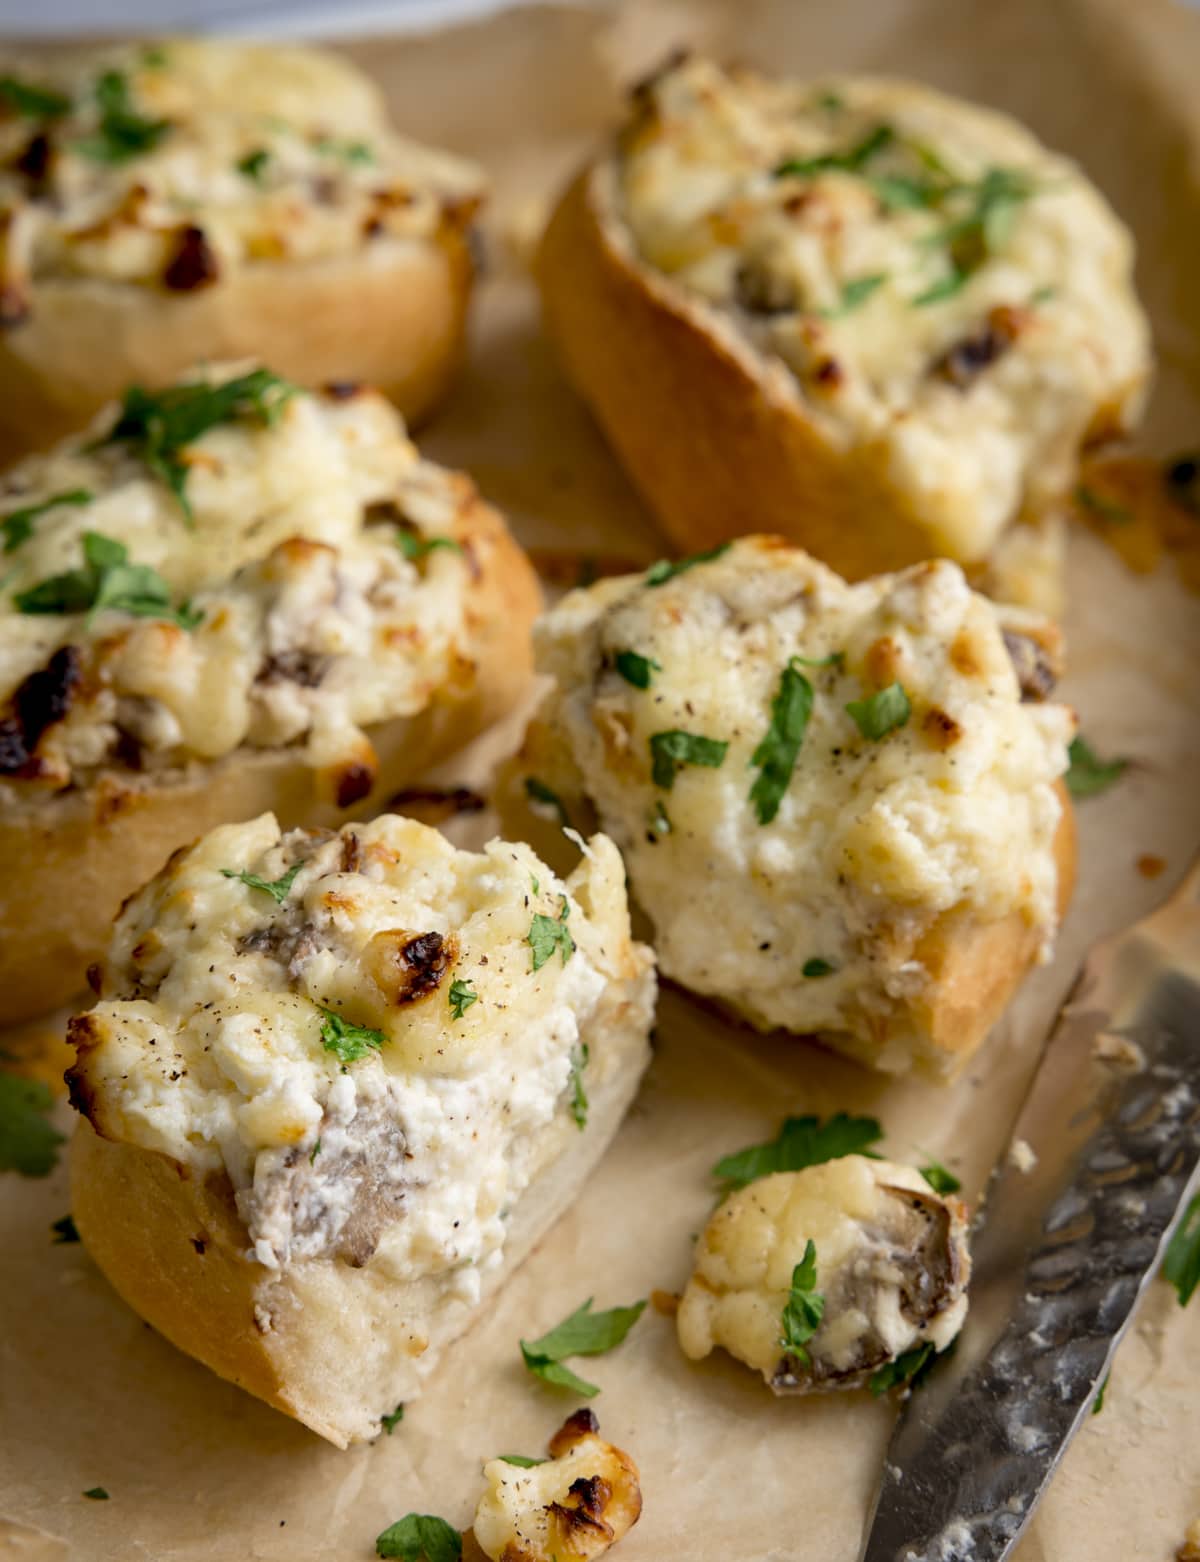 Cheesy Mushroom Stuffed Garlic Breads topped with parsley on a tray. The stuffed bread closest to the front has been sliced in half.